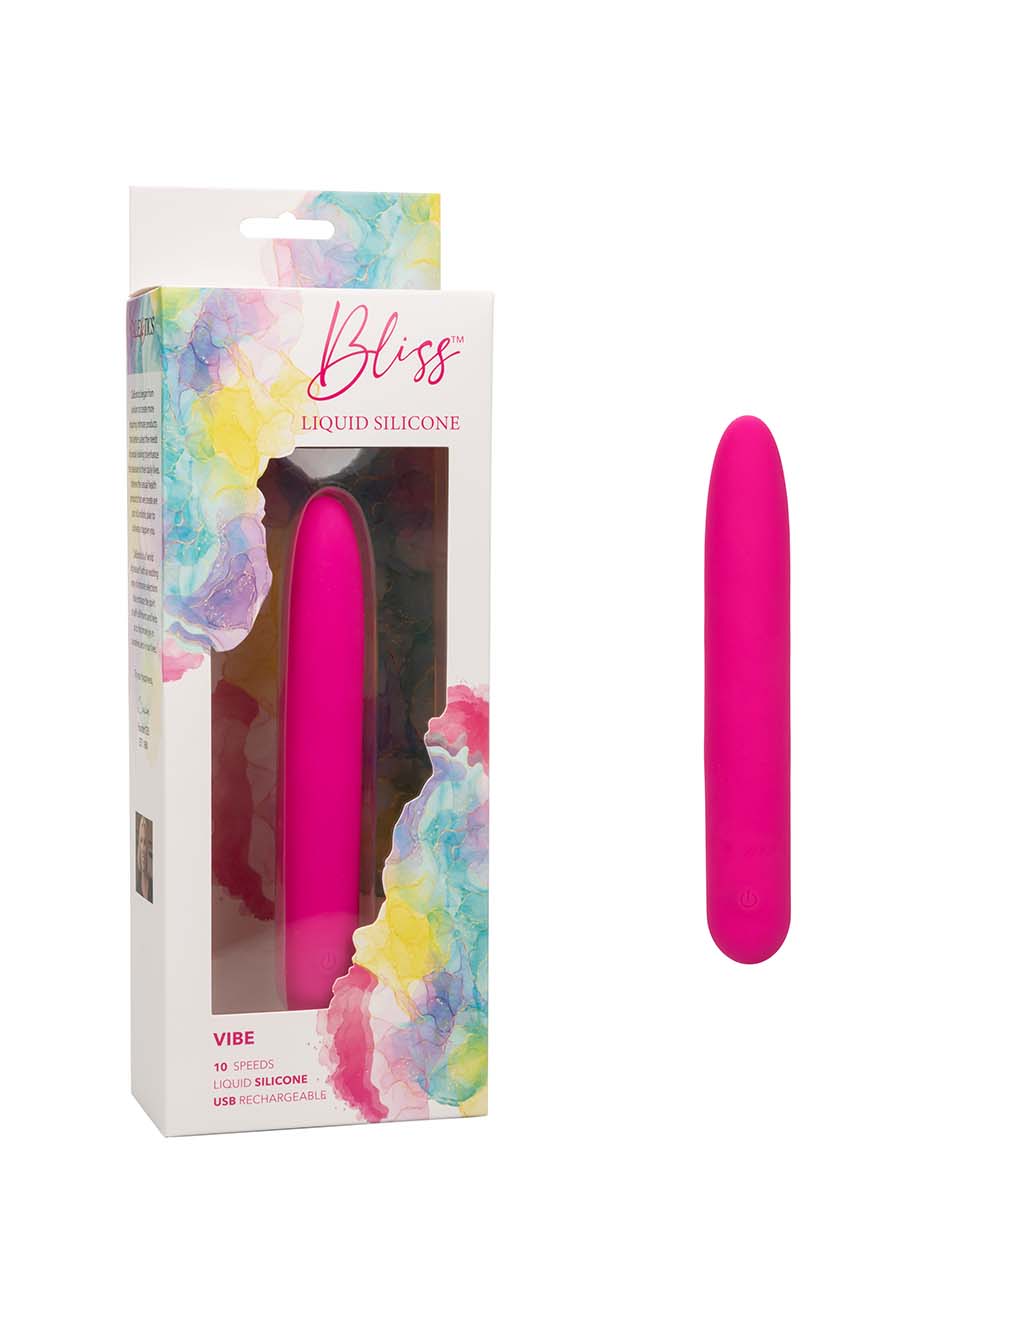 Bliss Liquid Silicone Vibe- With box